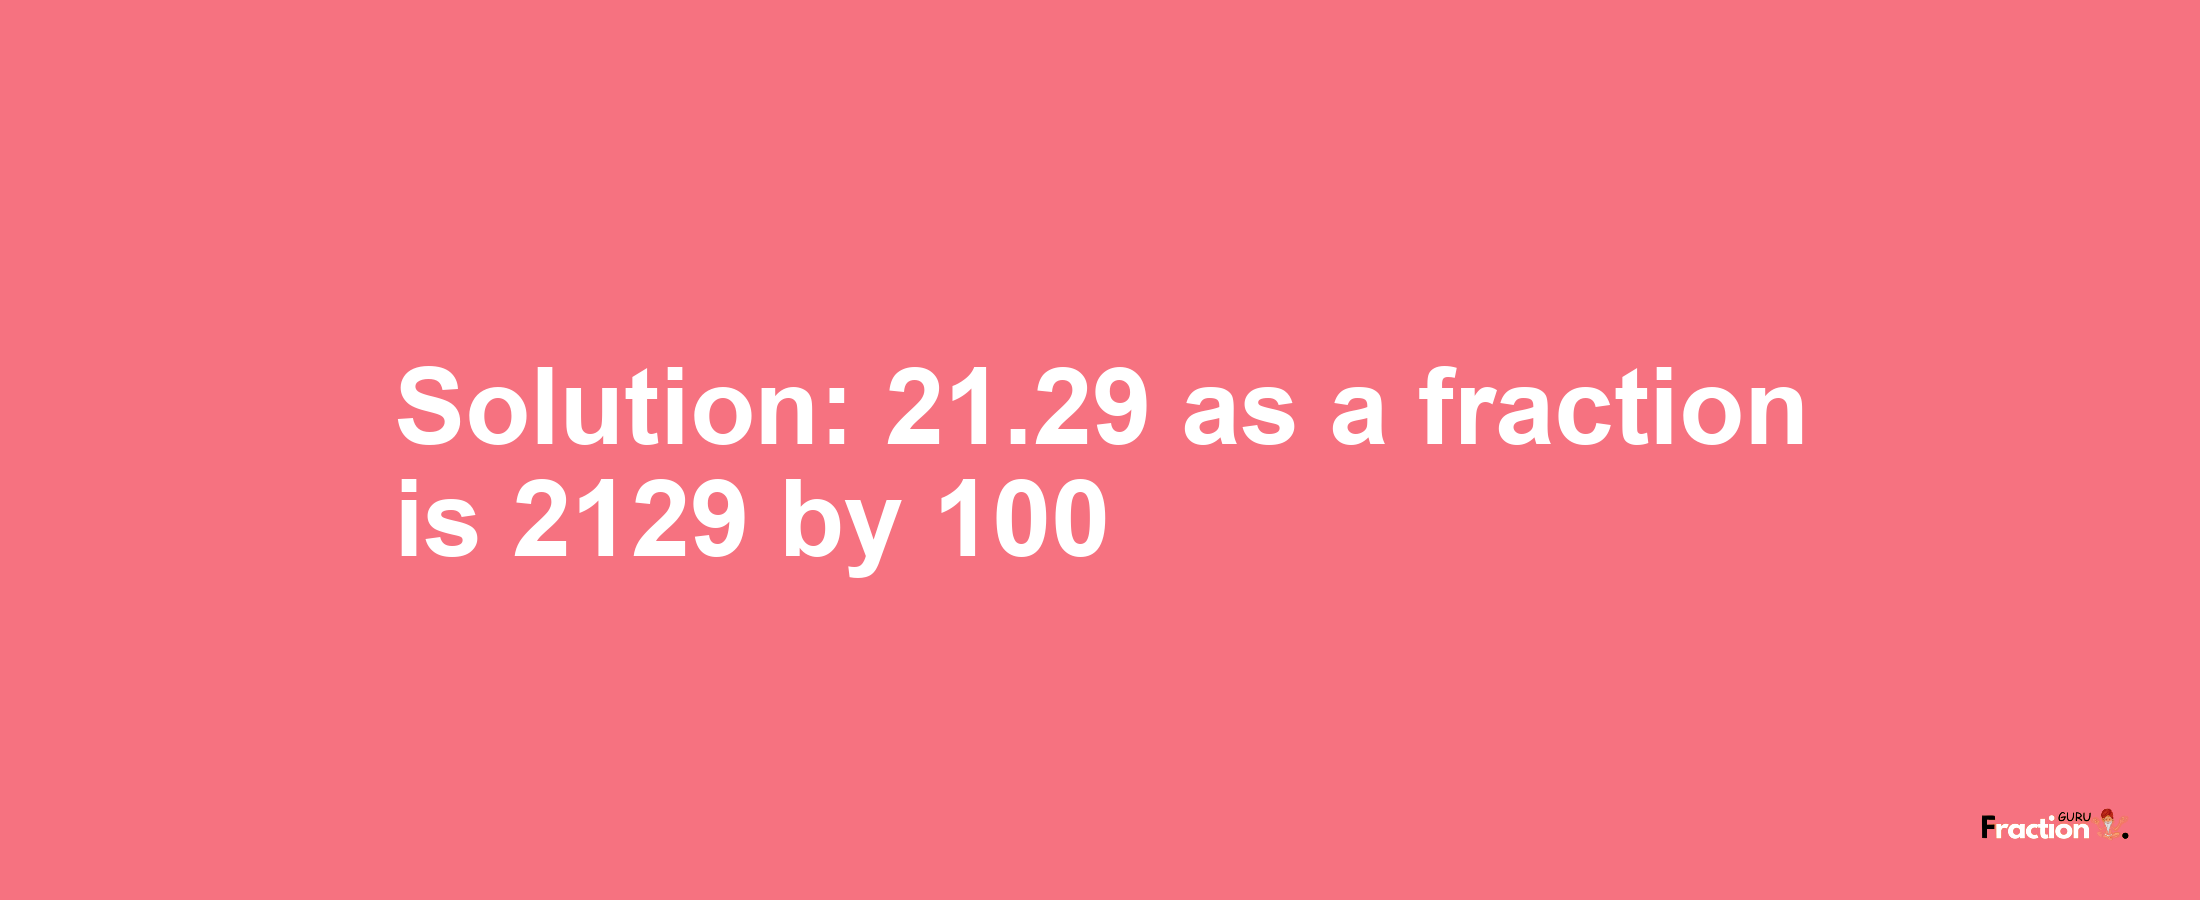 Solution:21.29 as a fraction is 2129/100